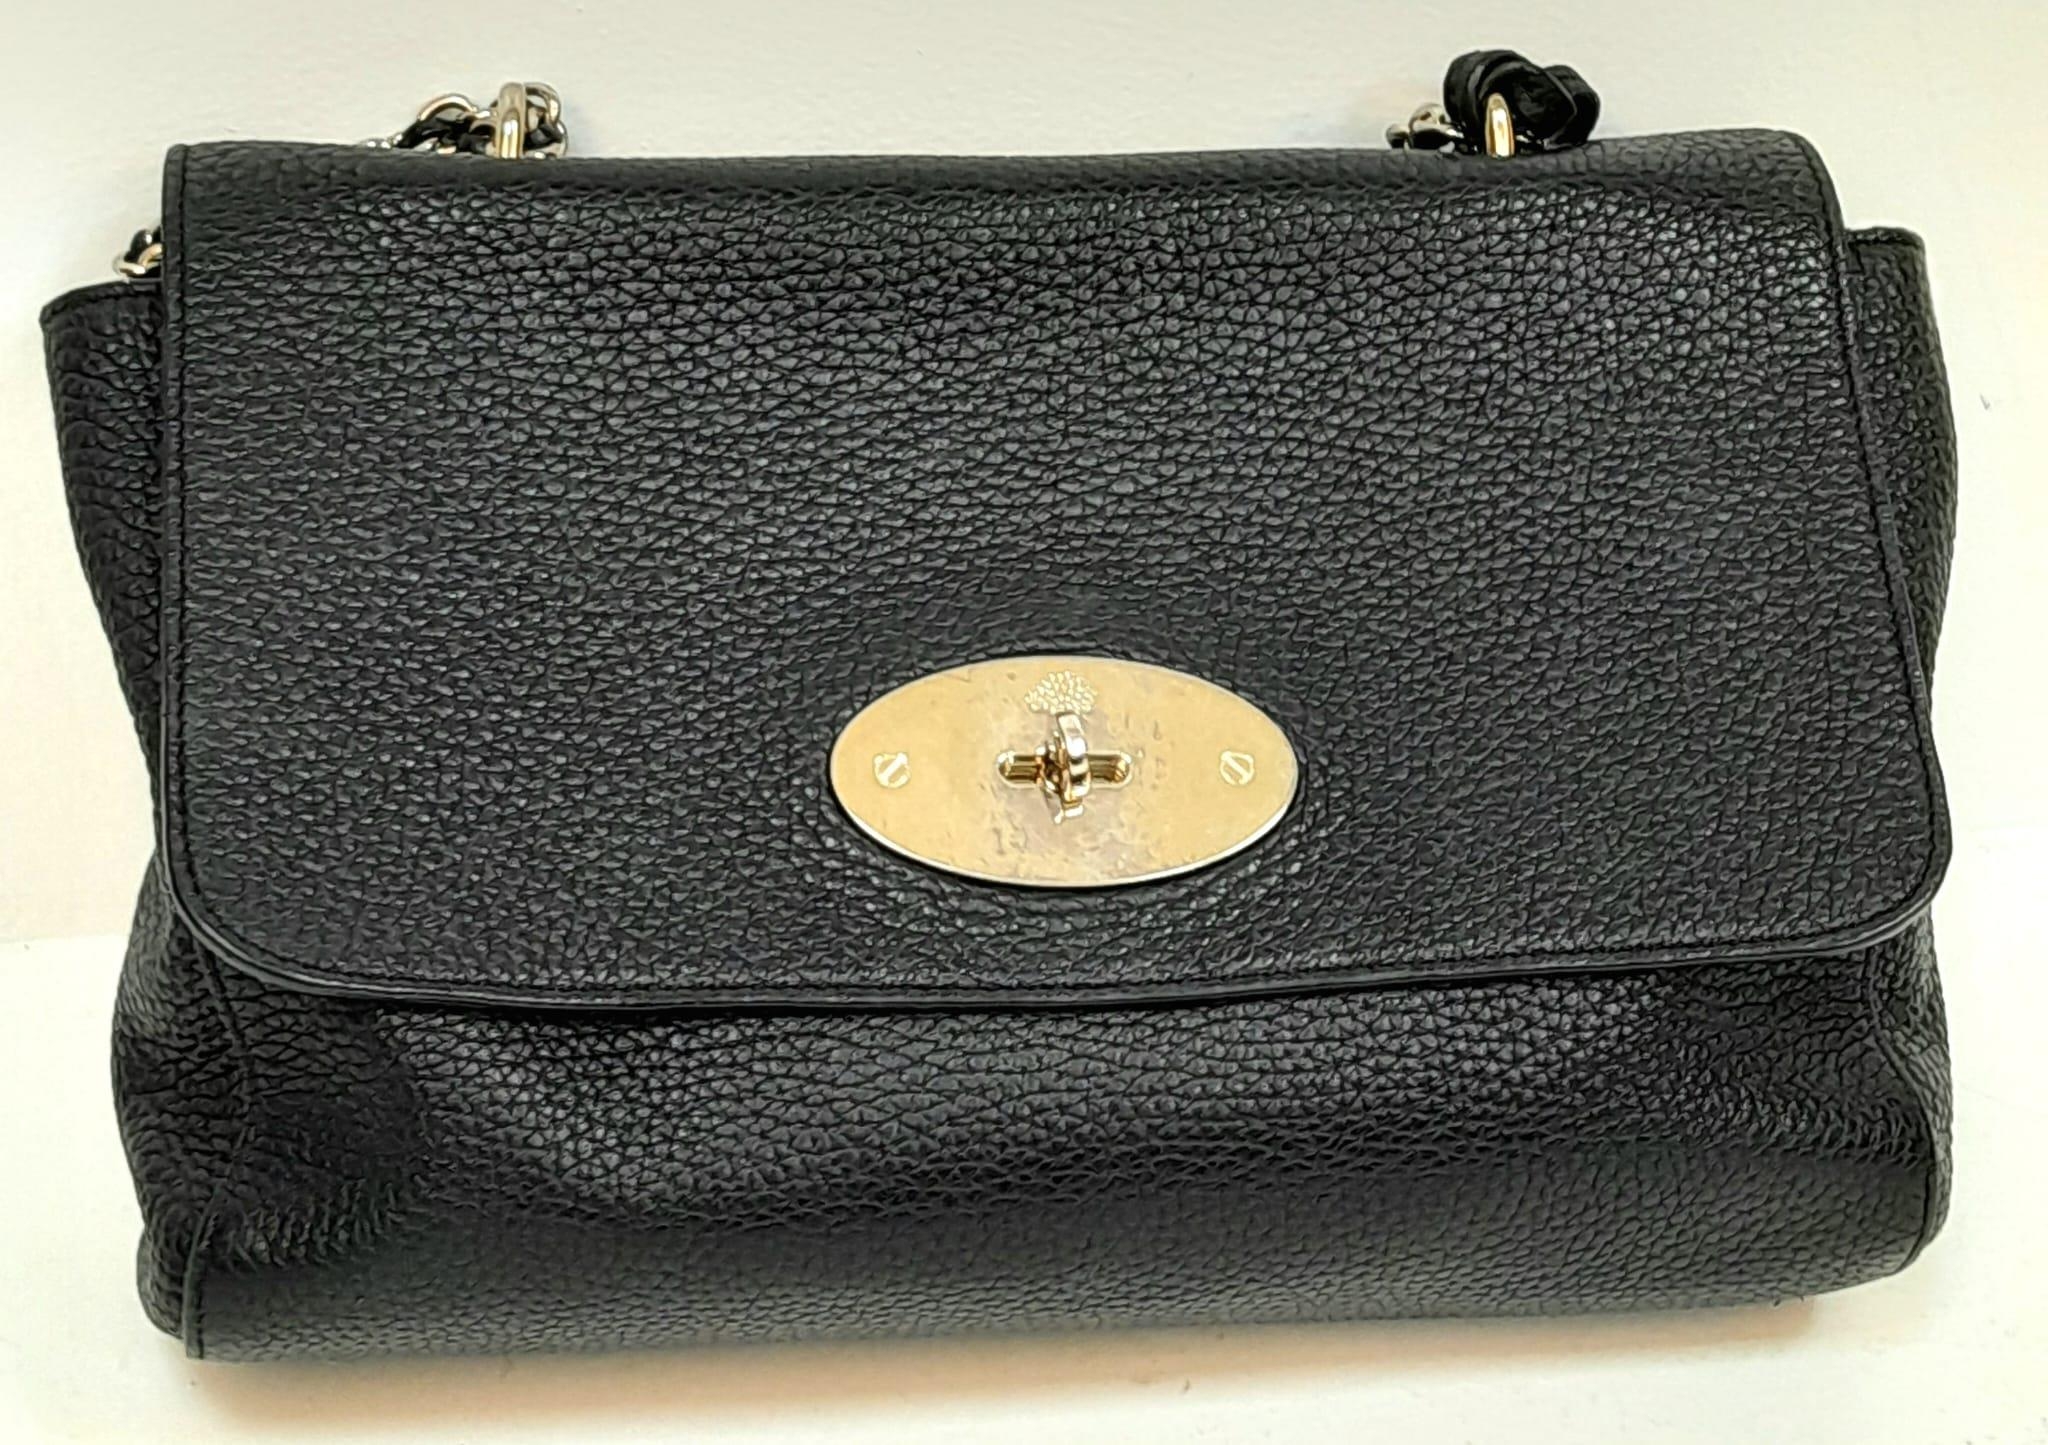 A Mulberry Black 'Lily' Bag. Leather exterior with gold-toned hardware, chain and leather strap, - Image 2 of 12